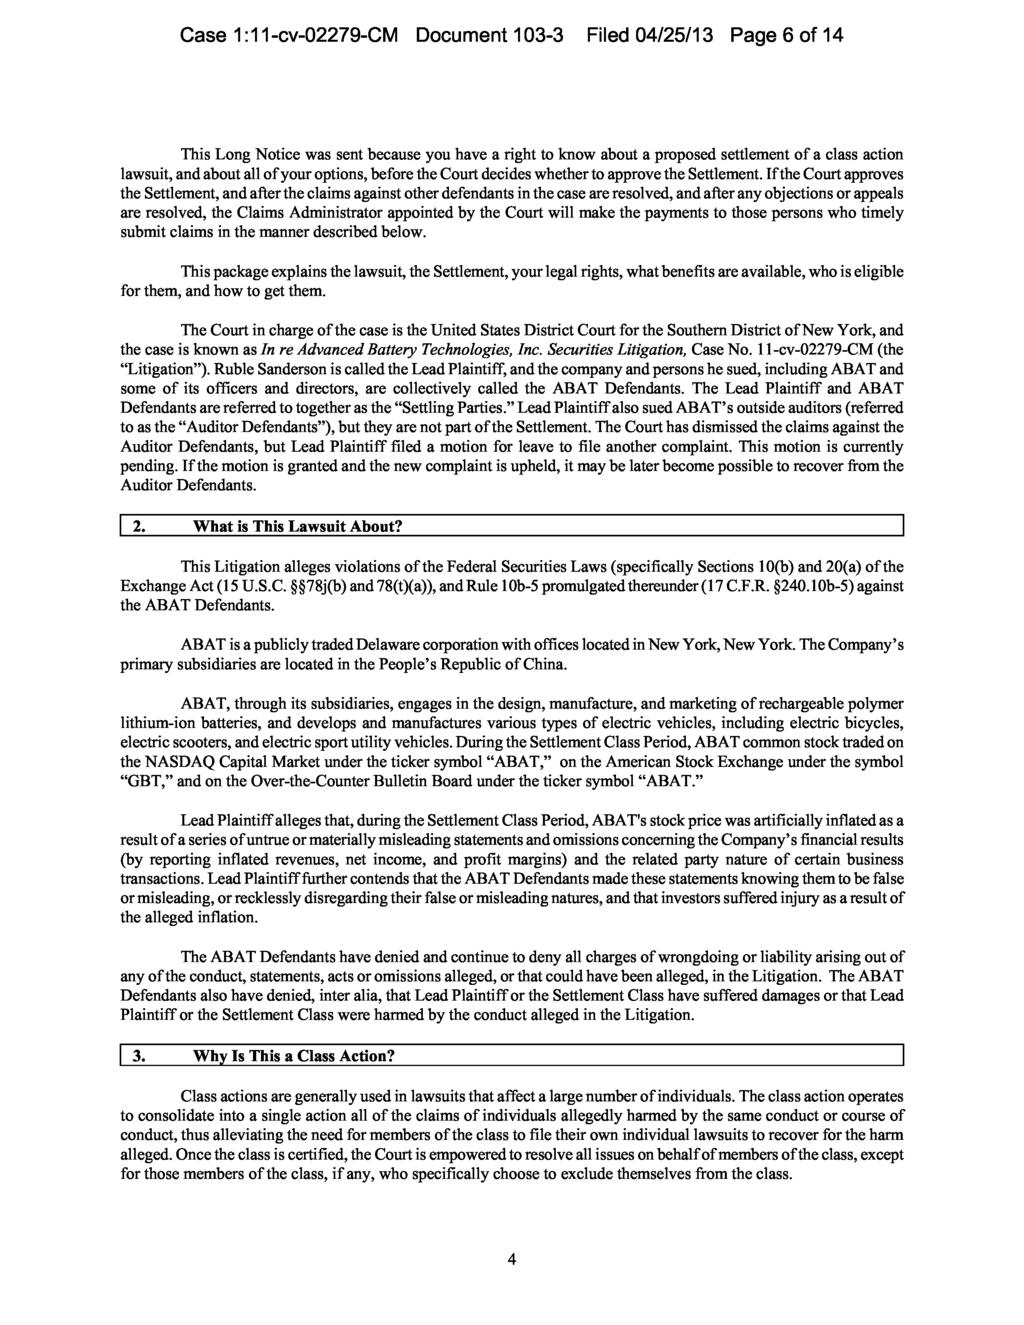 Case 1:11-cv-02279-CM Document 103-3 Filed 04/25/13 Page 6 of 14 This Long Notice was sent because you have a right to know about a proposed settlement of a class action lawsuit, and about all of